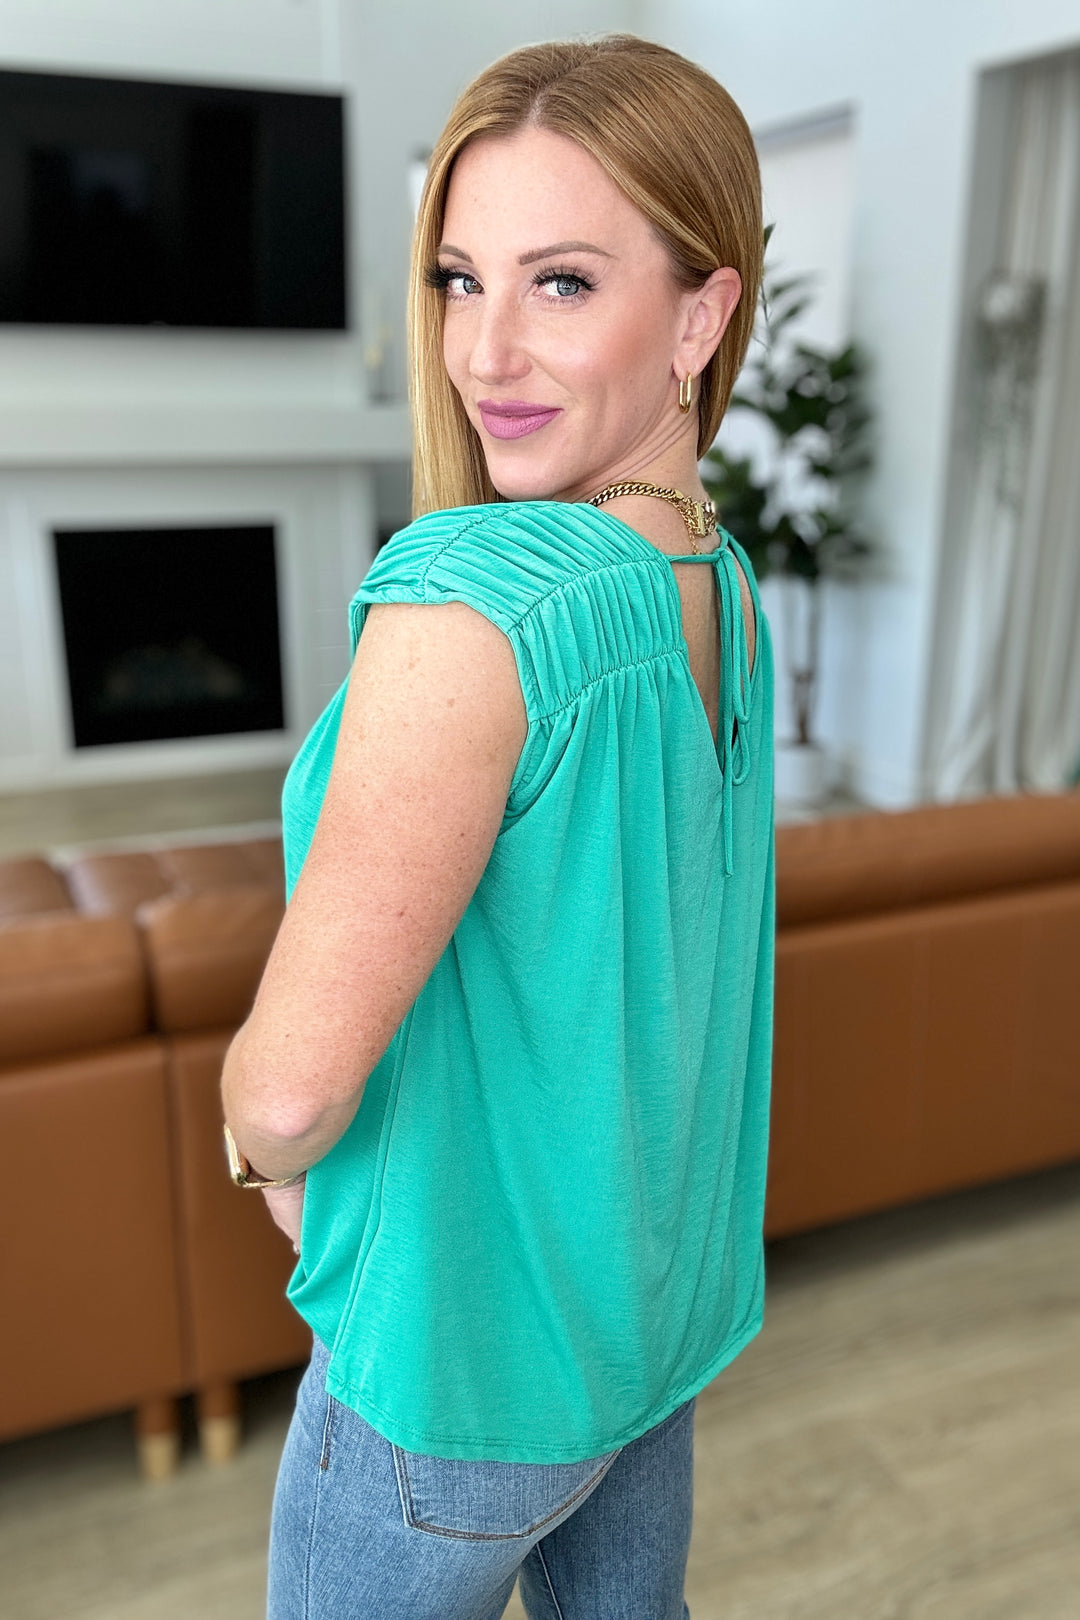 Ruched Cap Sleeve Top in Emerald